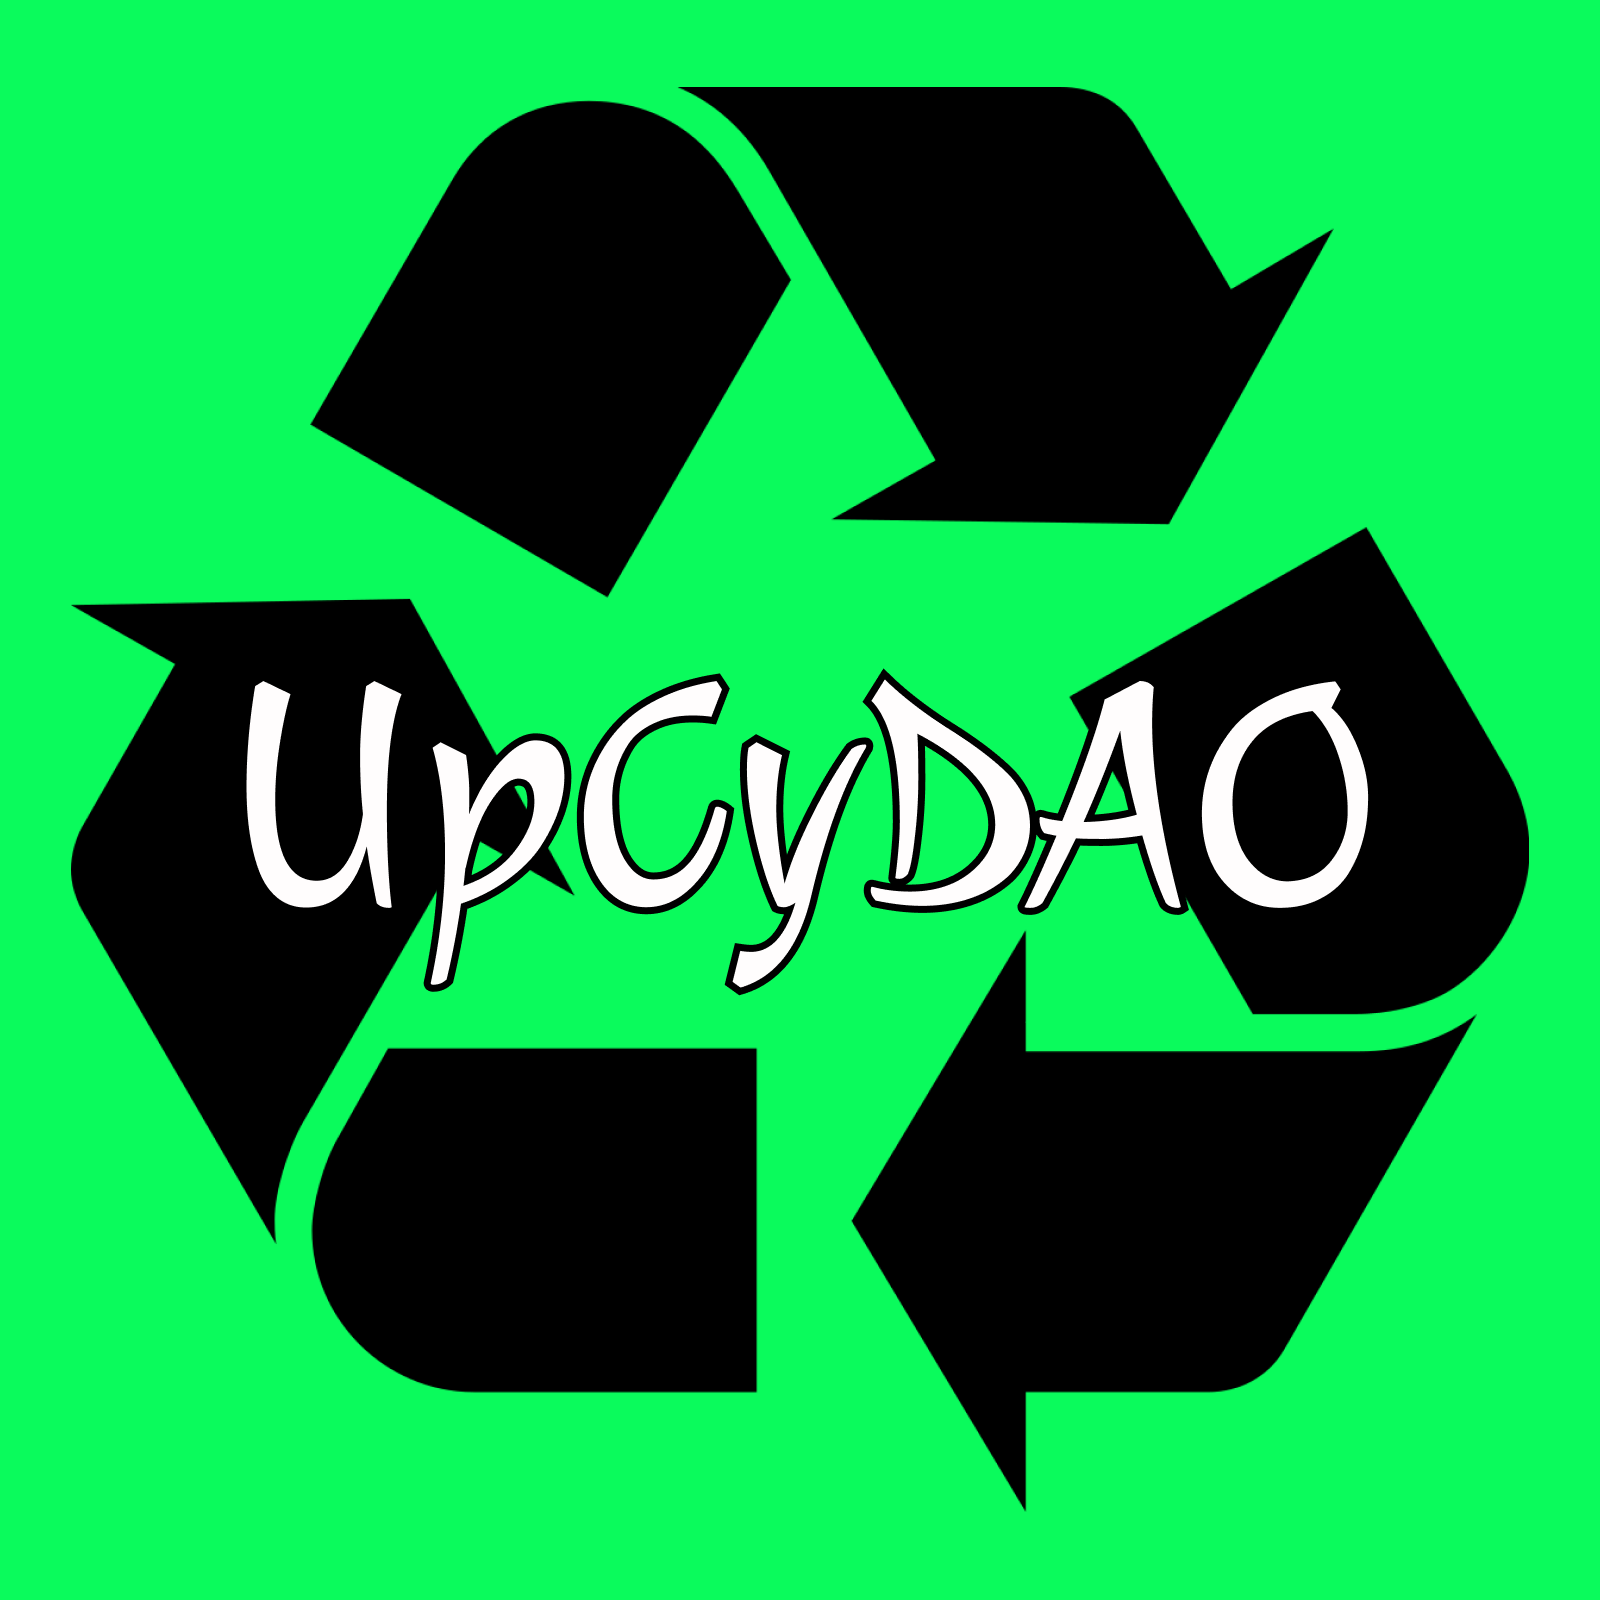 welcome to UpCyDAO